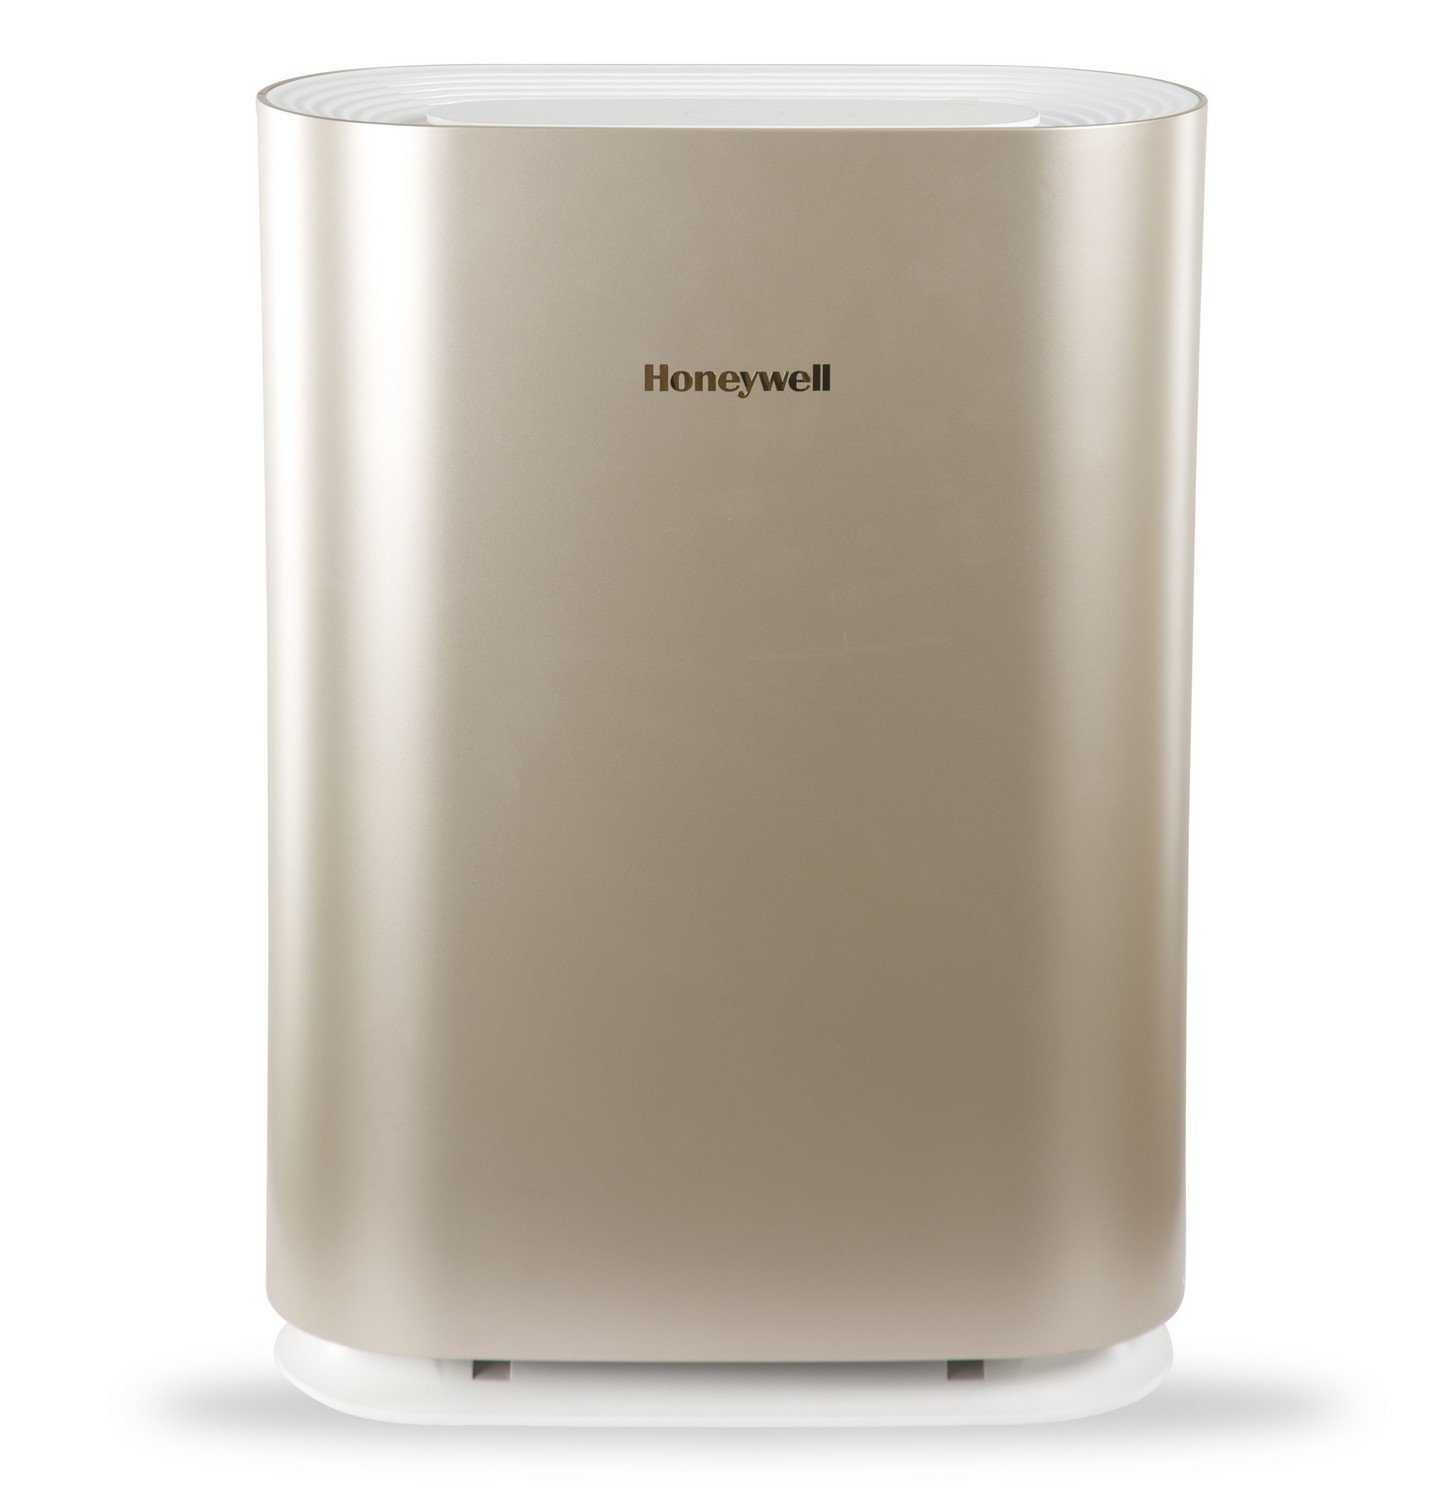 Honeywell Air Touch HAC35M1101G is available in India under 20,000